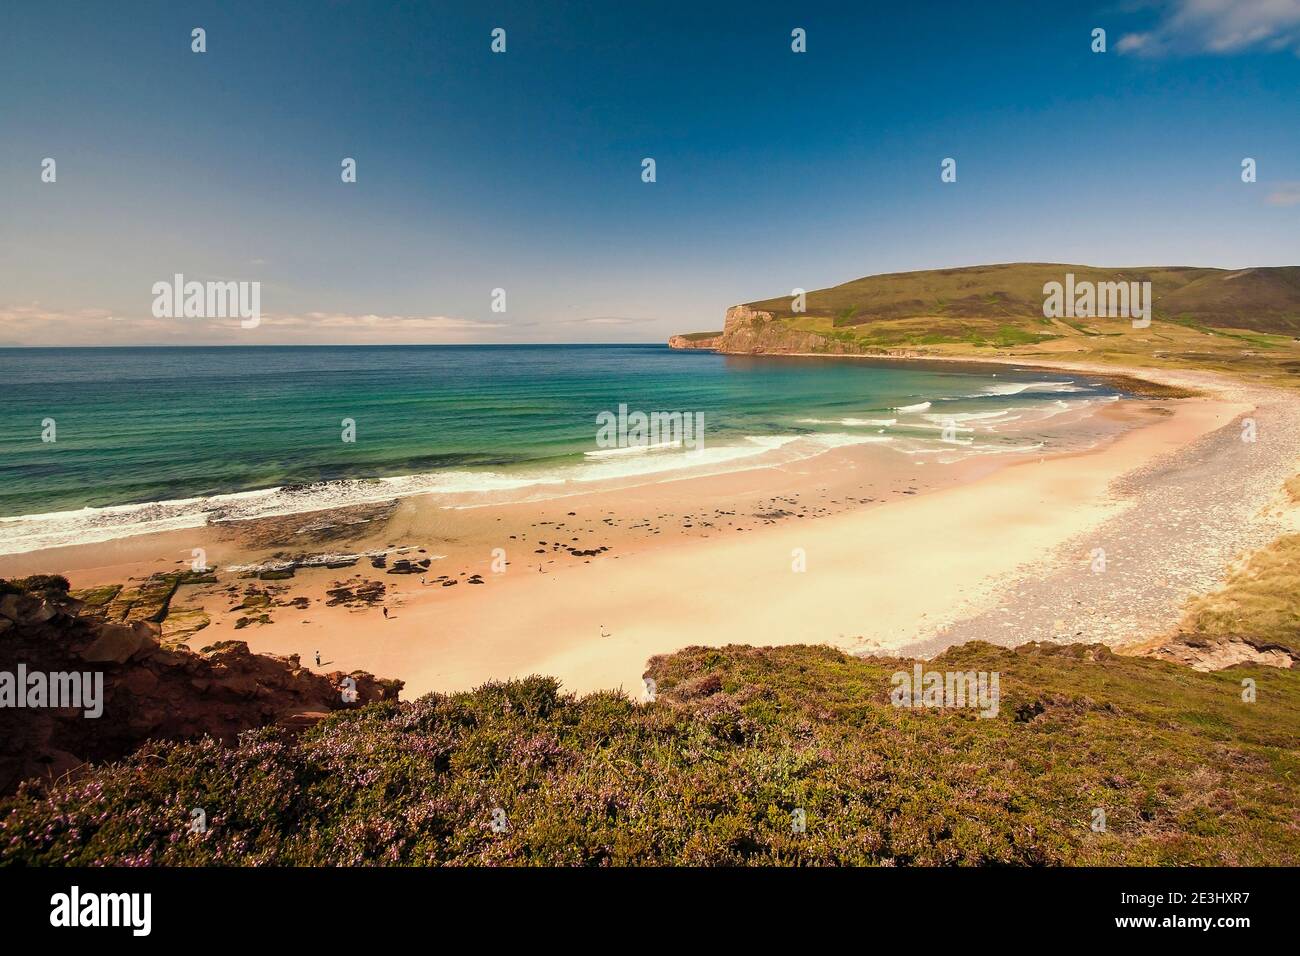 Aerial view of sandy beach and cliffs with heather in foreground on Orkey islands in Scotland Stock Photo